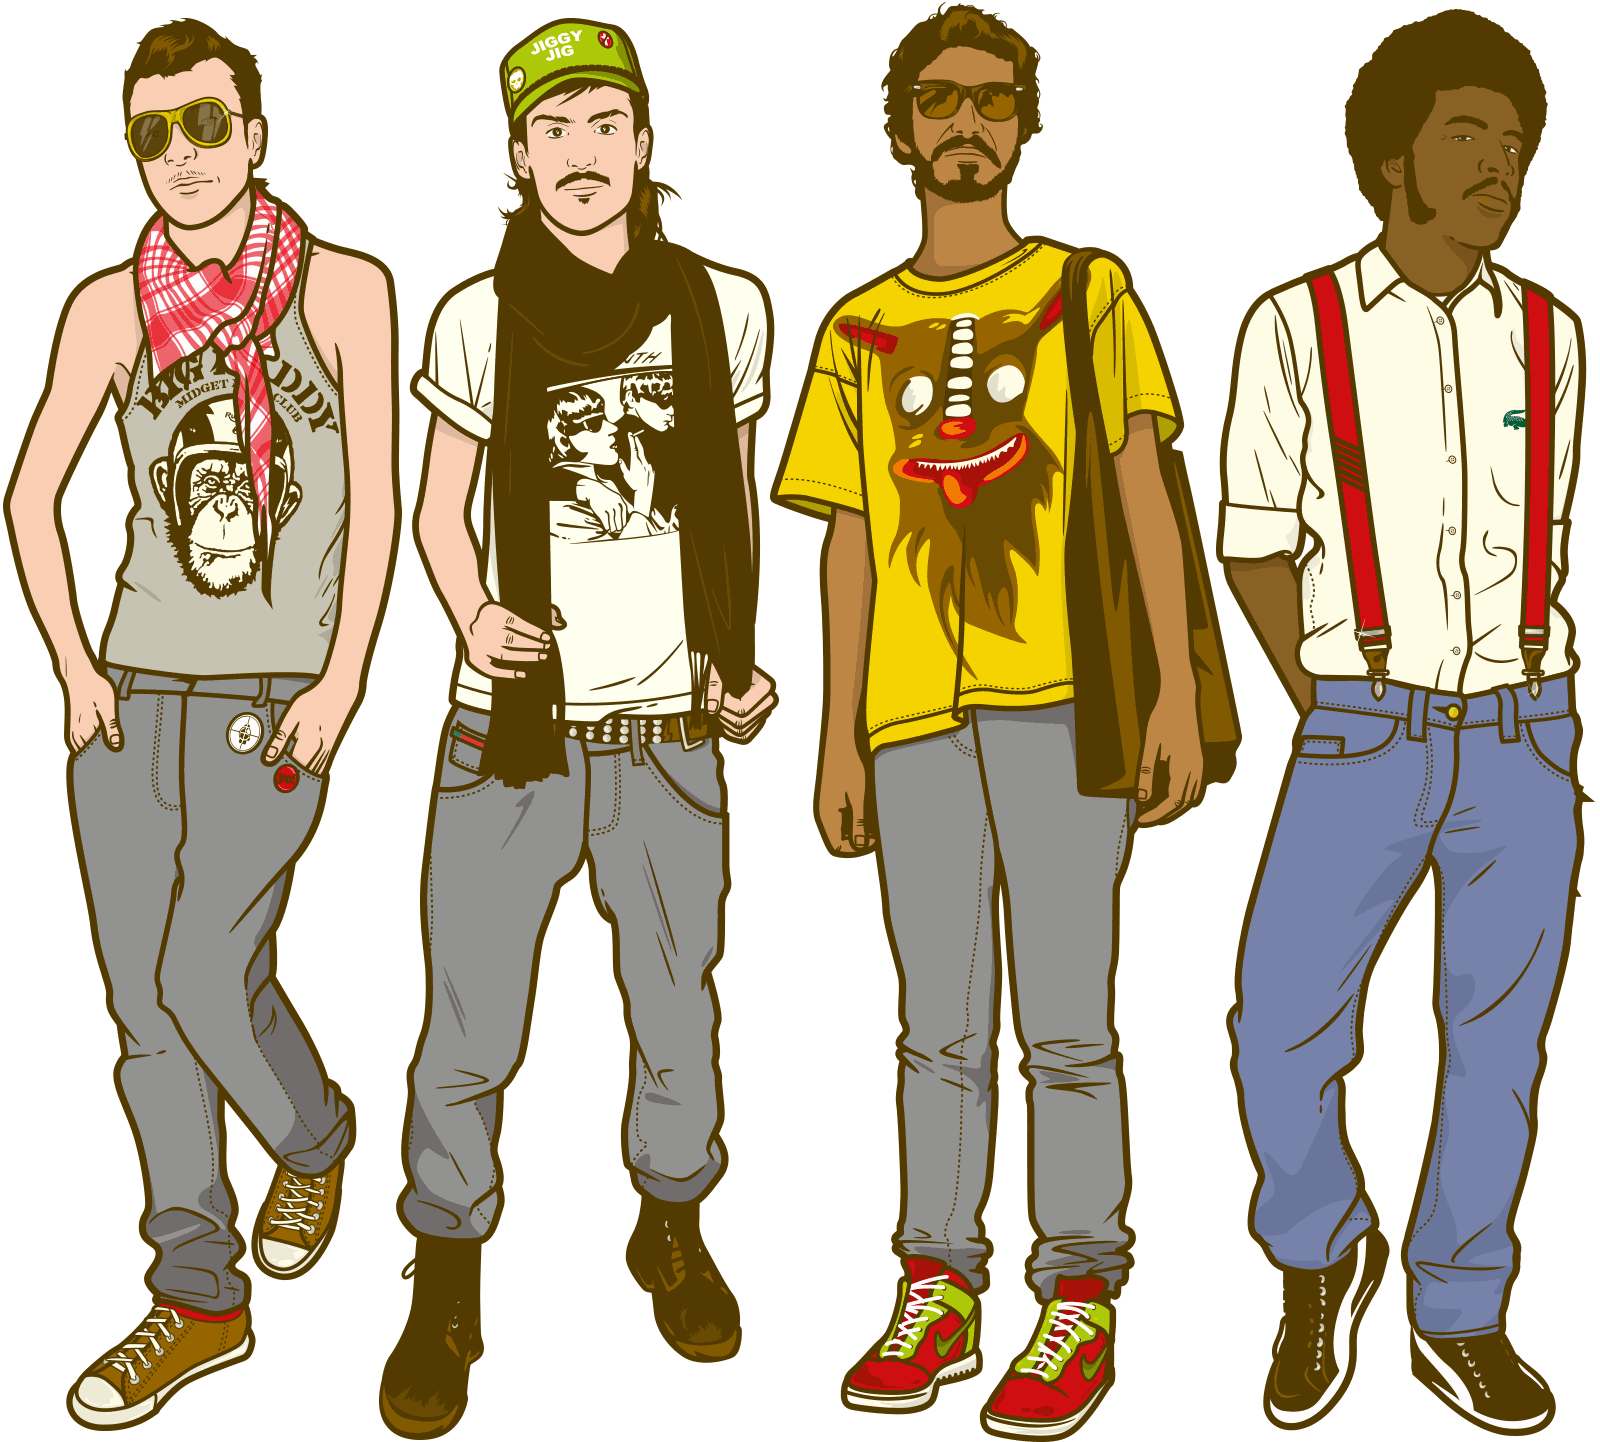 Illustration of hipsters